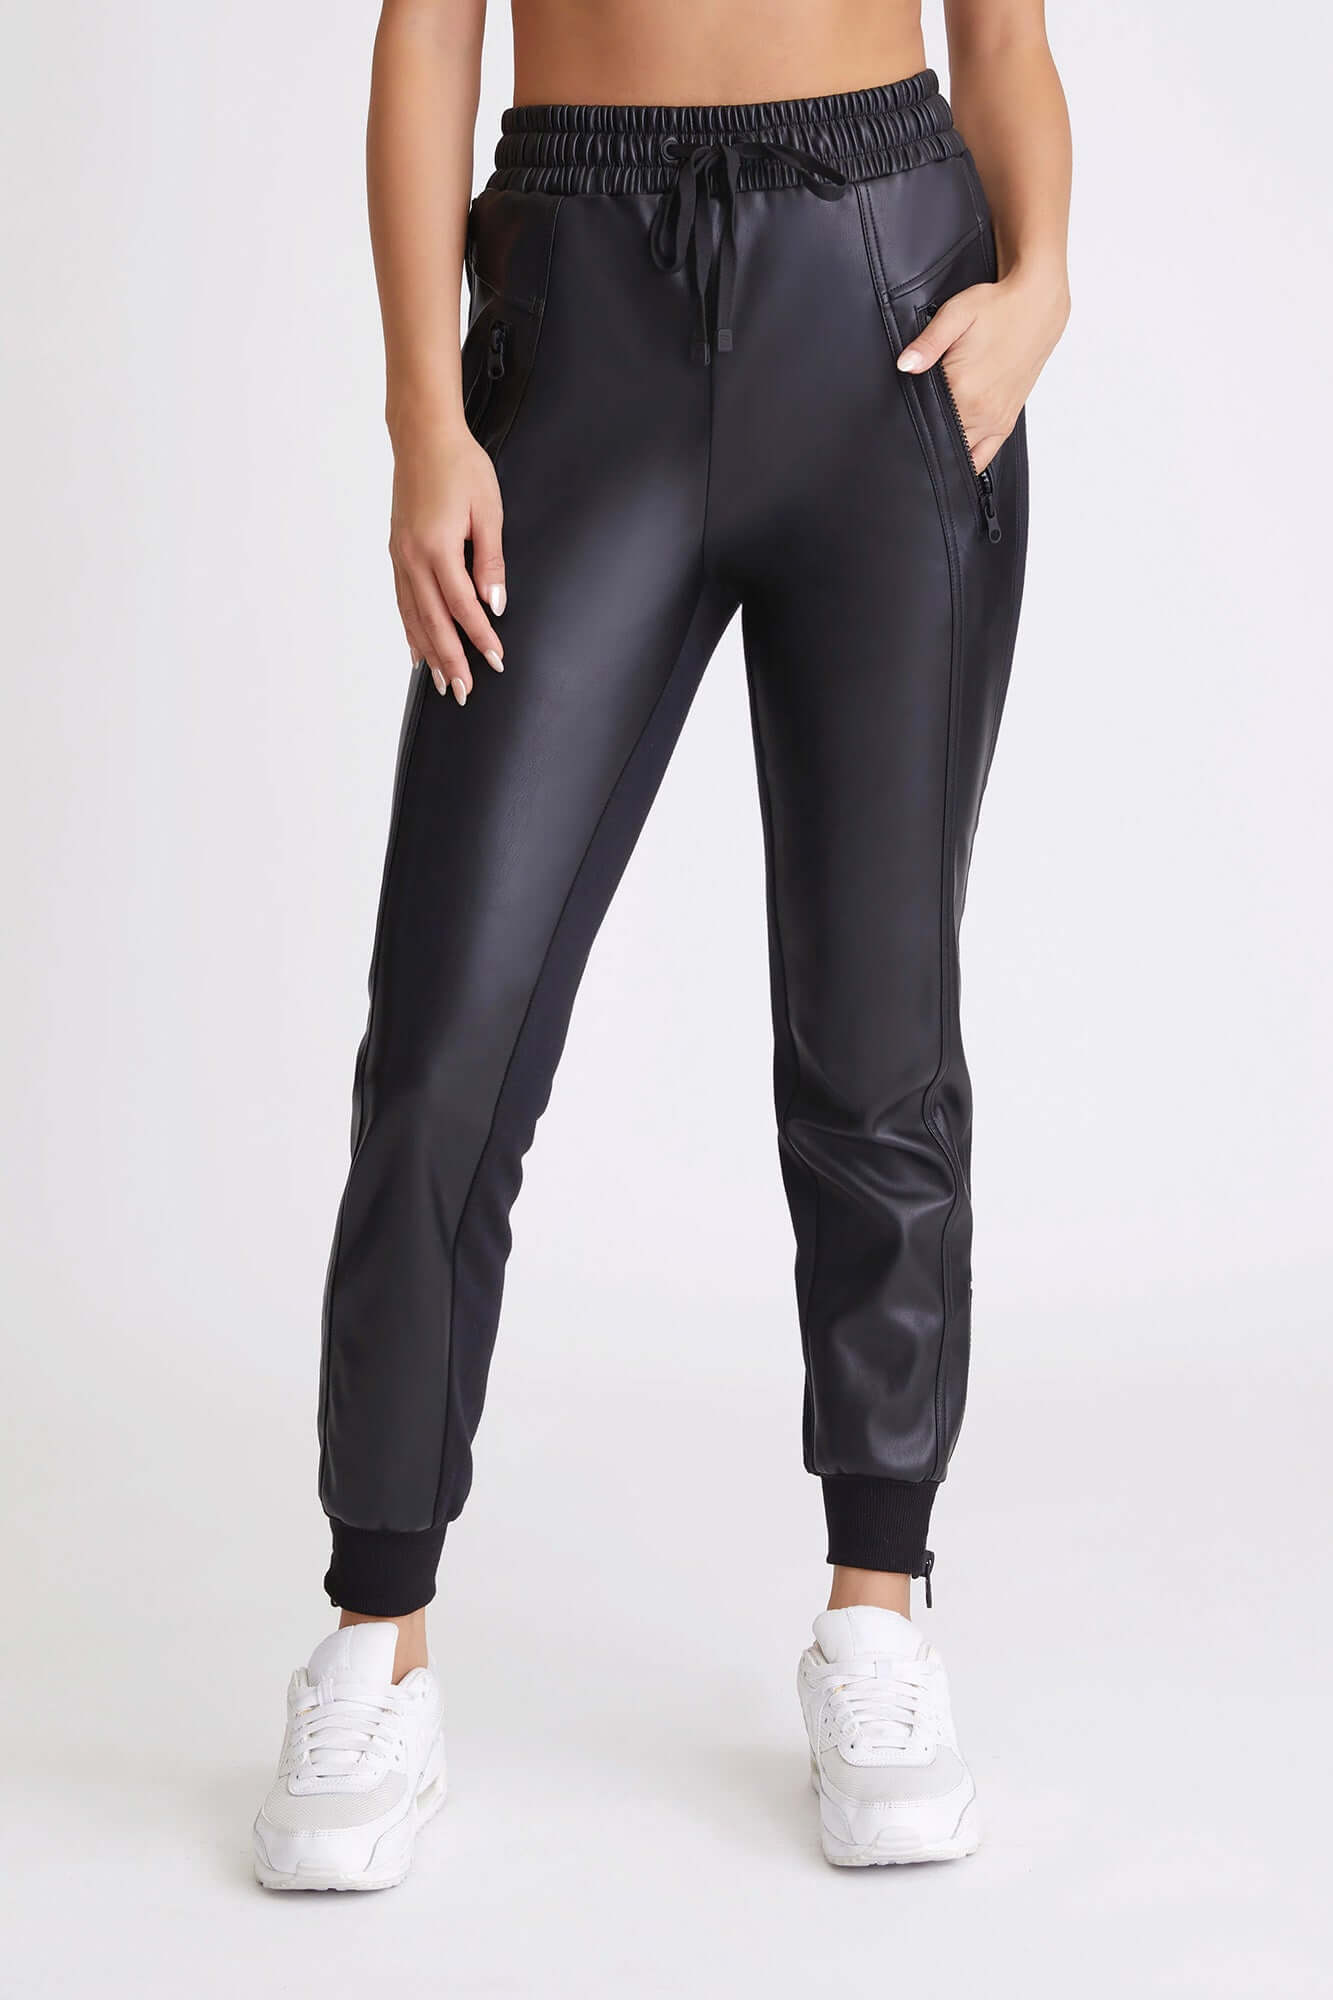 Cardiff Seamed Pant in Black